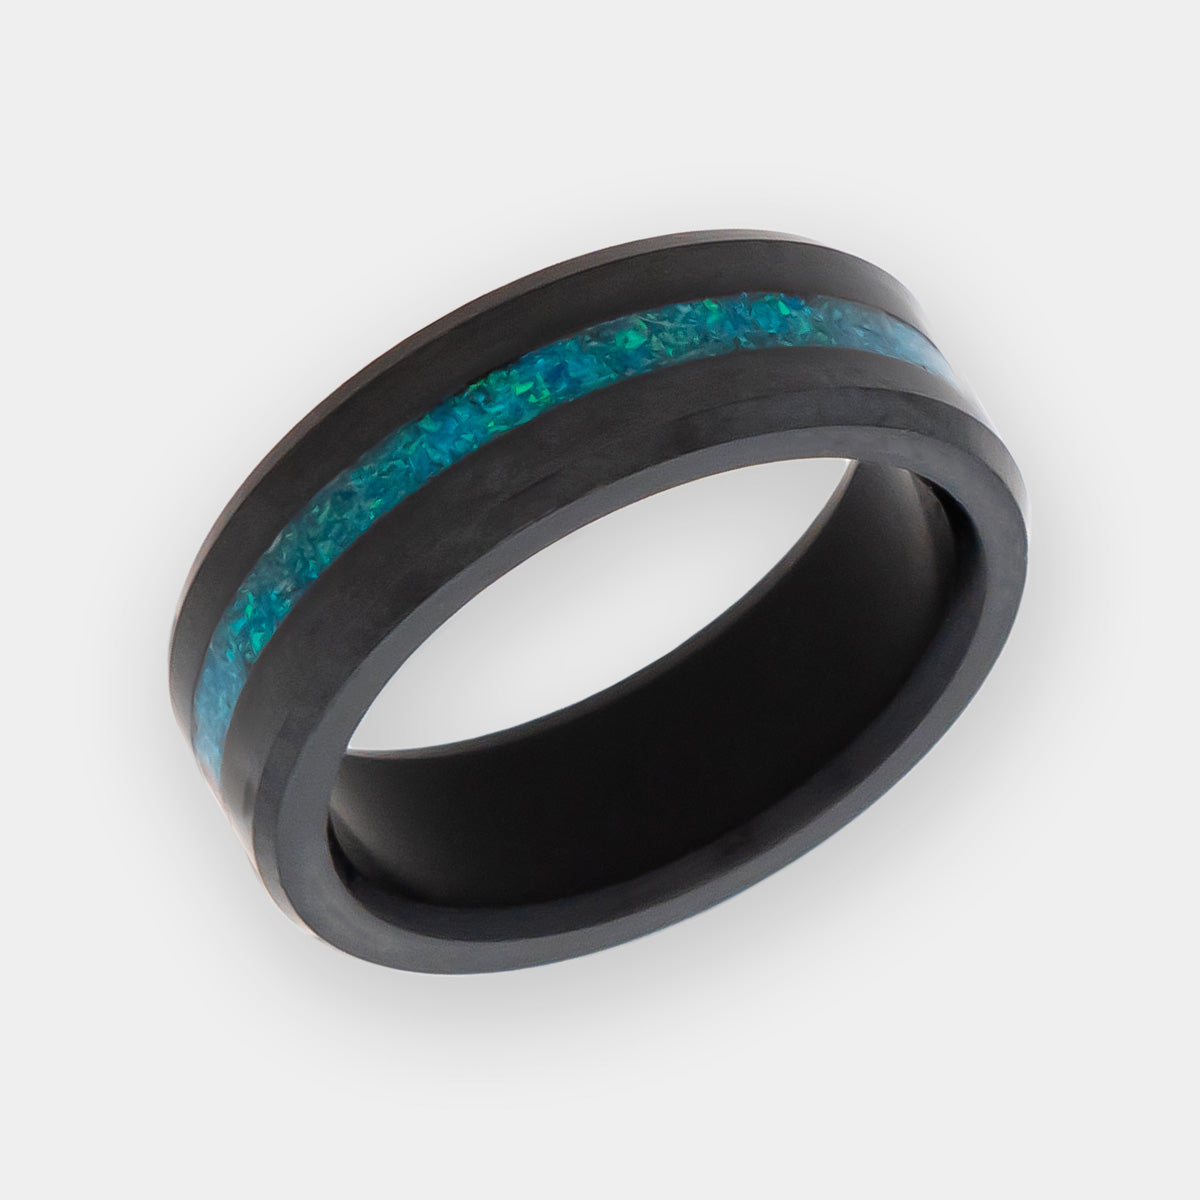 Elysium Ares: 8mm Solid Black Diamond Ring with Blue Opal Inset 